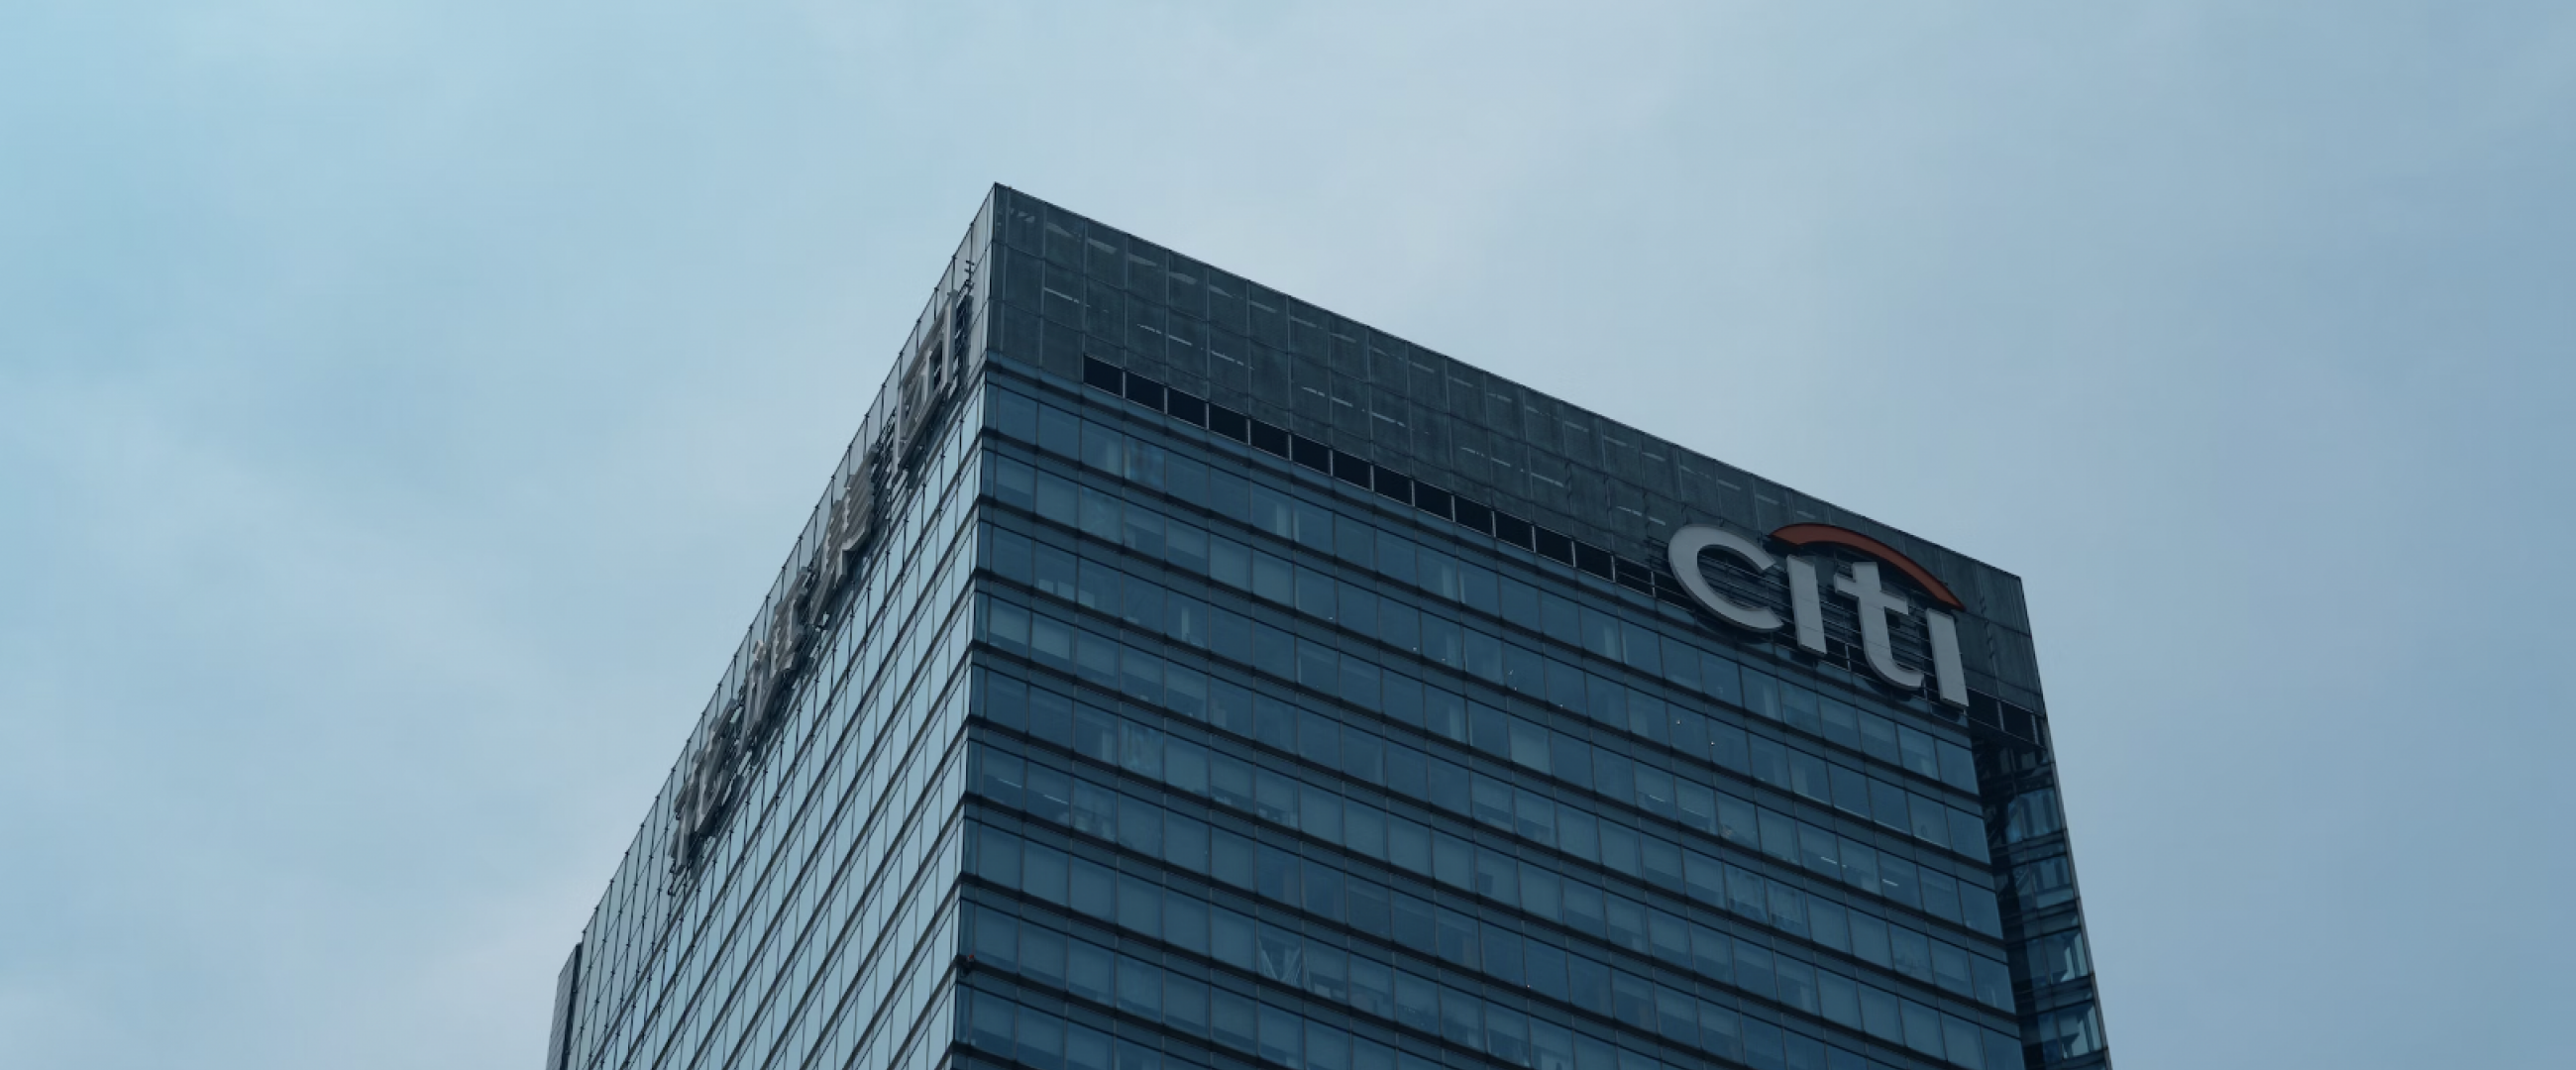 Photograph of a skyscraper with the Citigroup logo appearing at the top